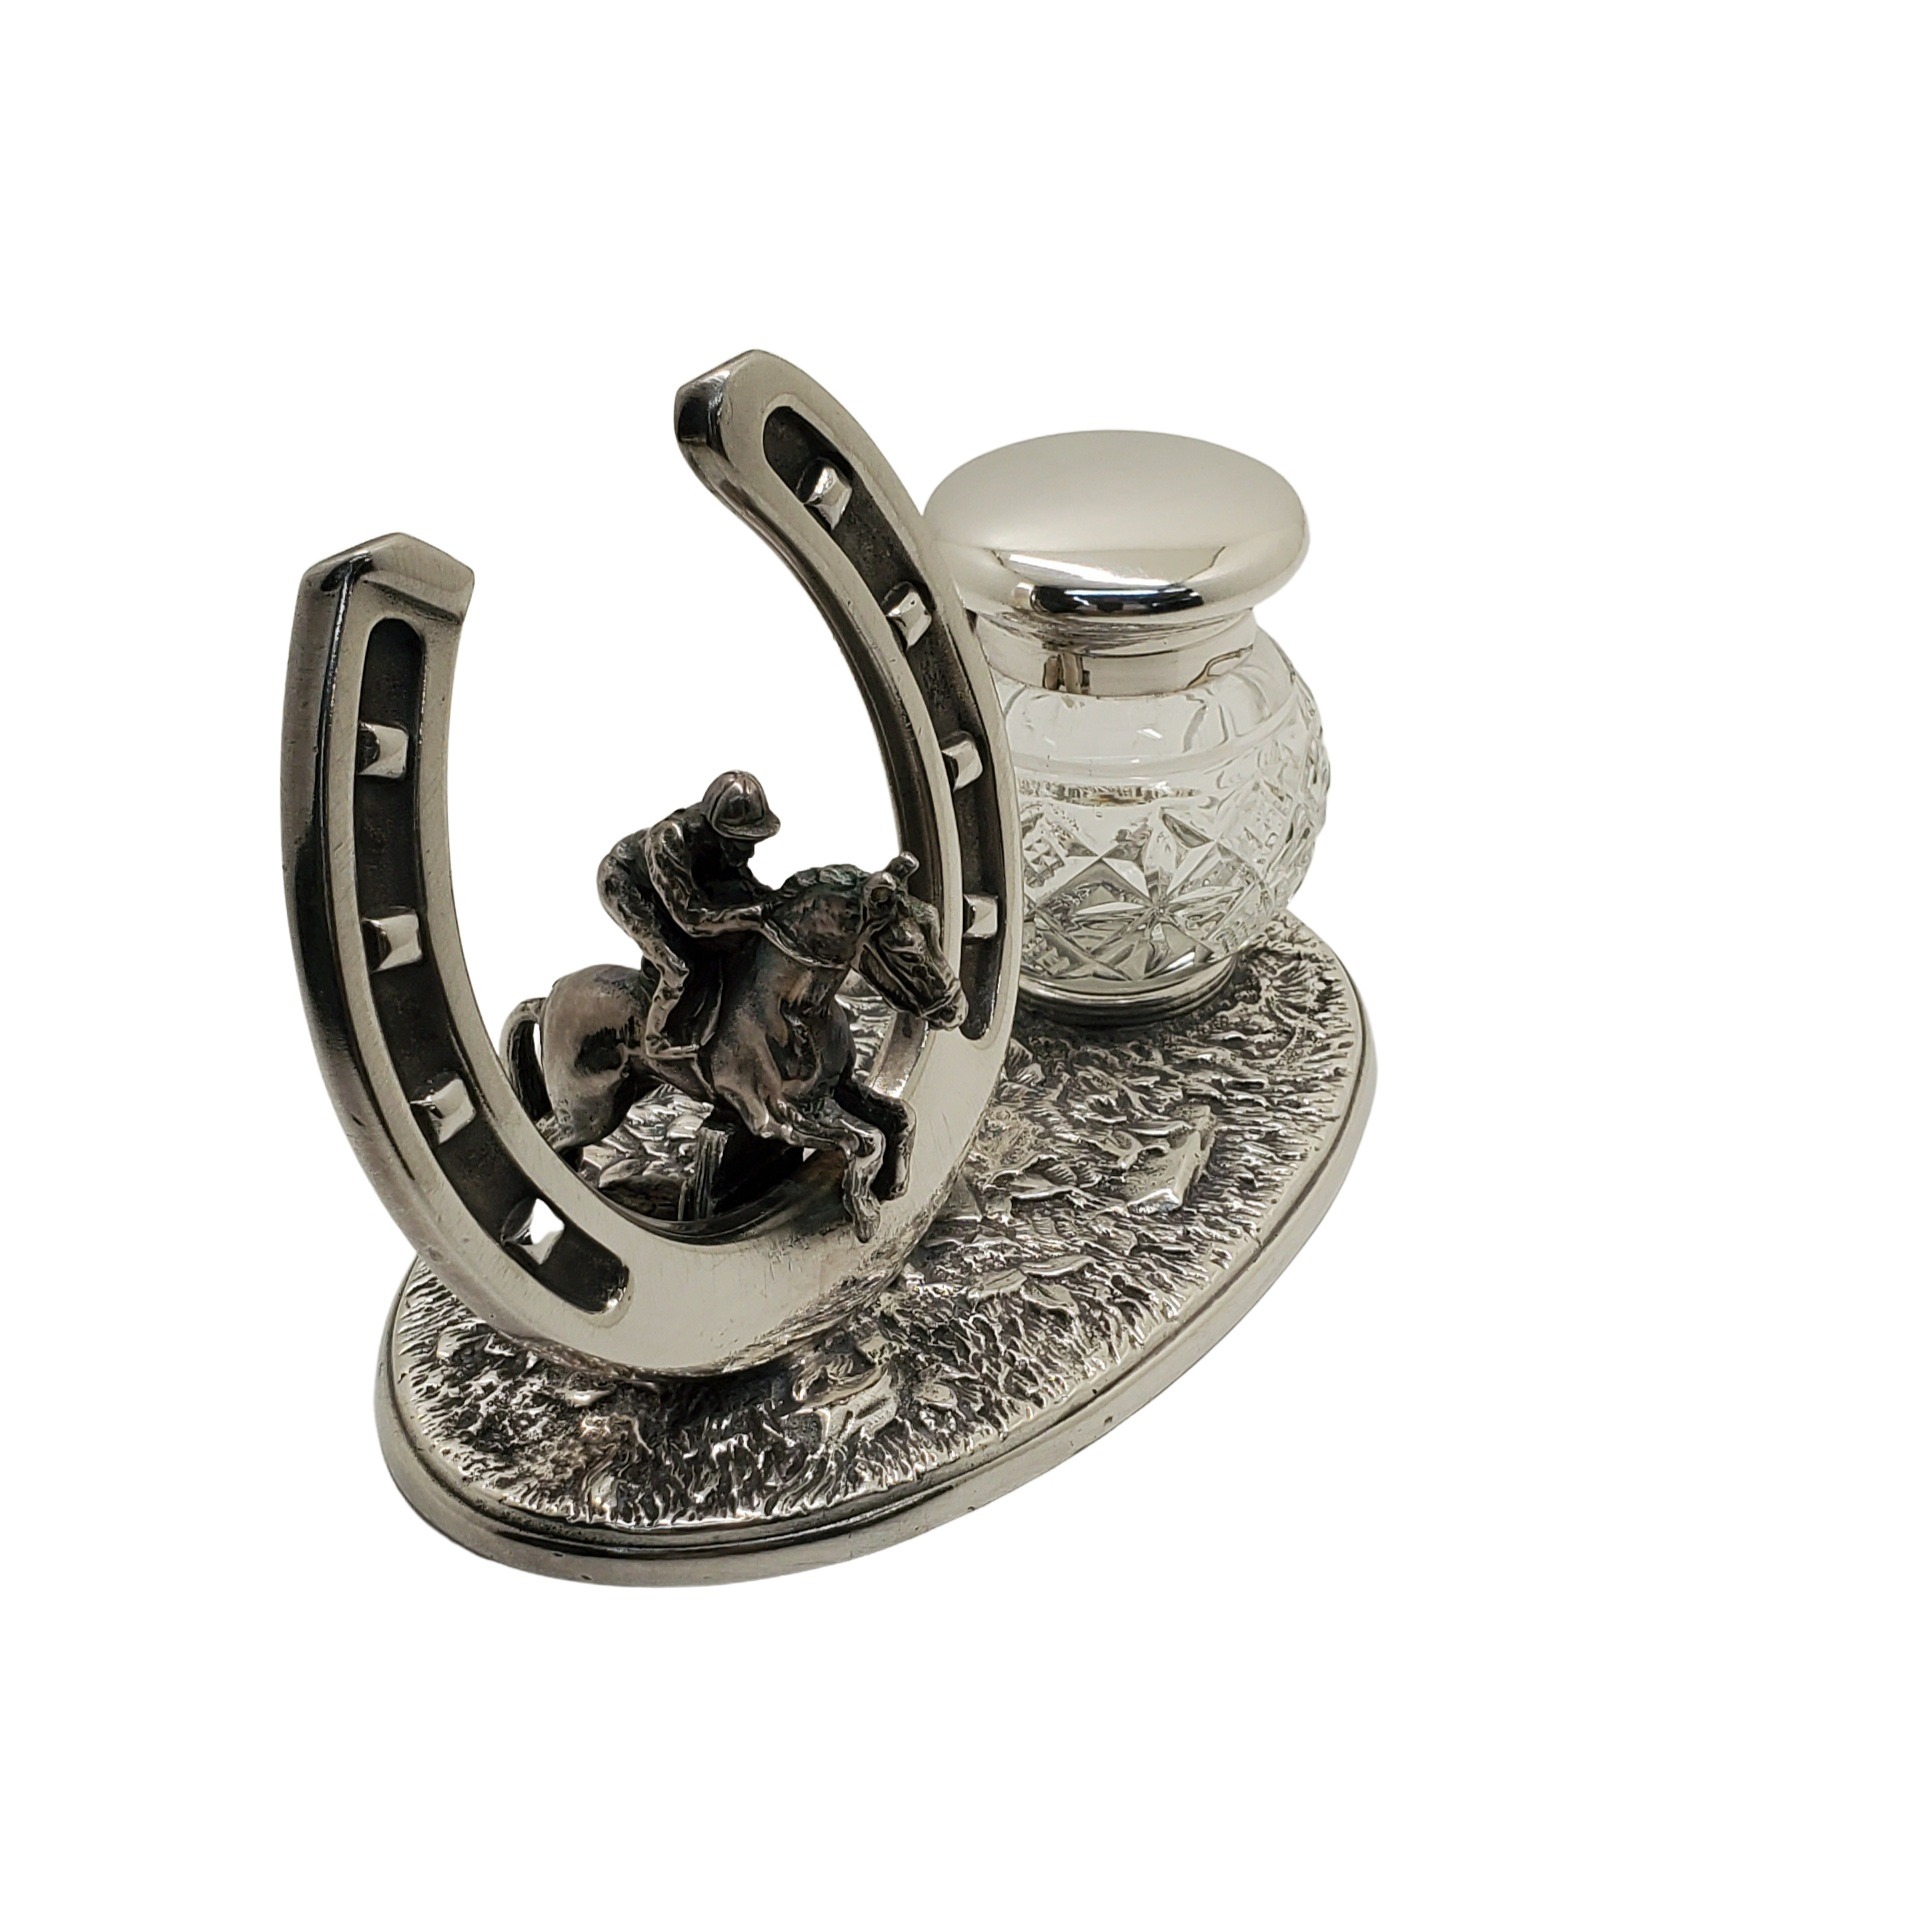 Horse Shoe & Rider Inkwell English Silver Plate